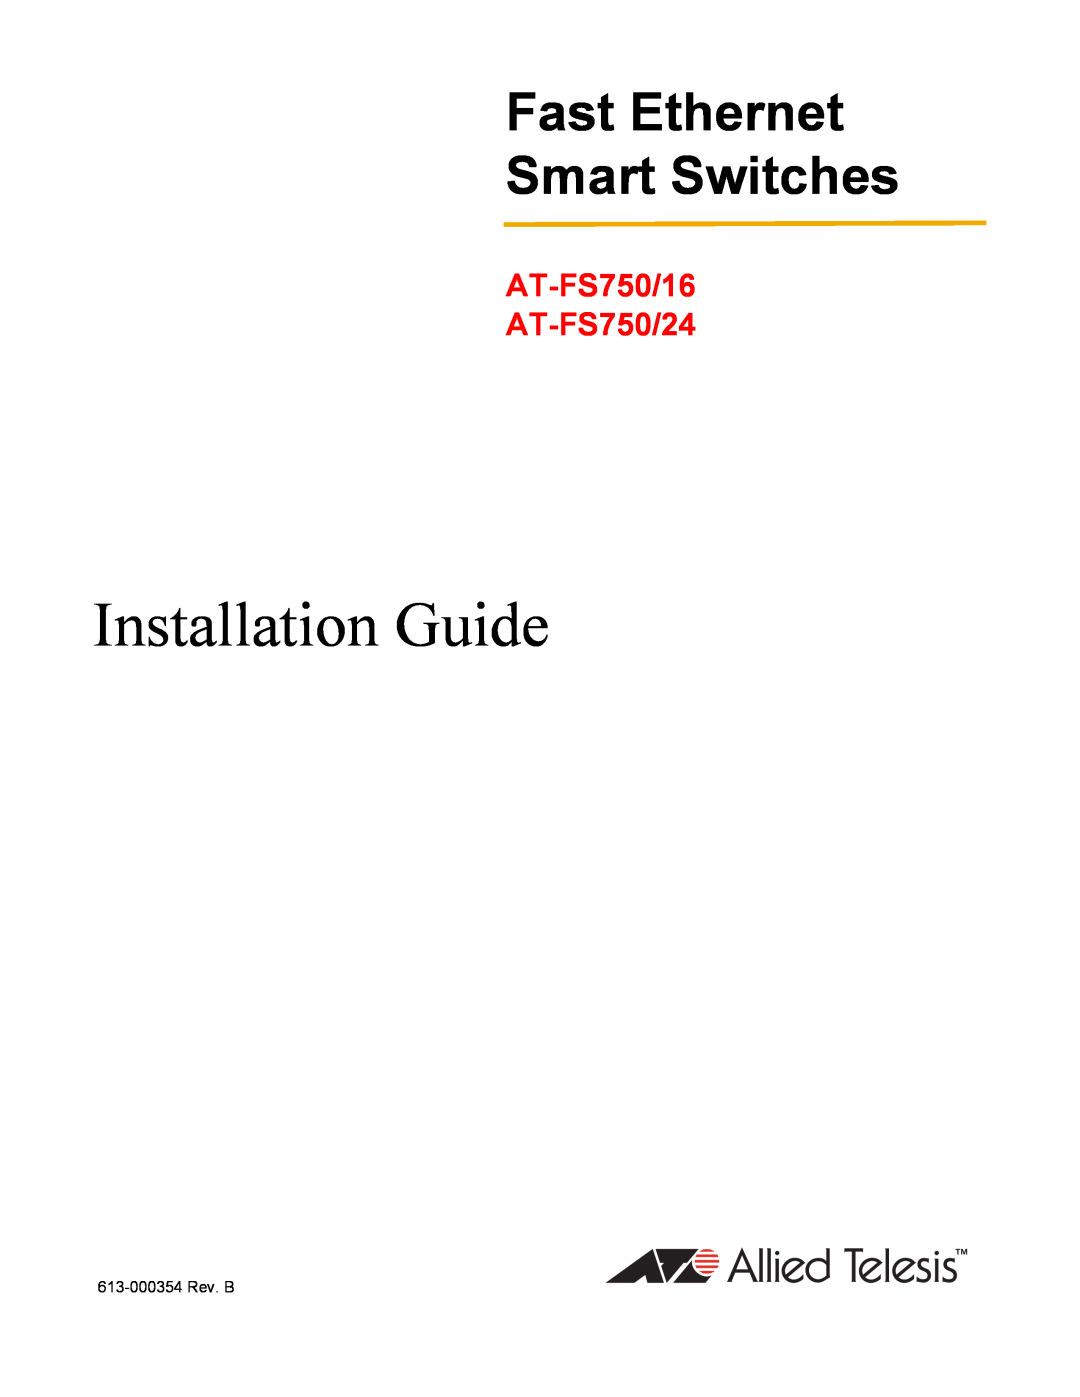 Allied Telesis manual Installation Guide, Fast Ethernet Smart Switches, AT-FS750/16 AT-FS750/24 